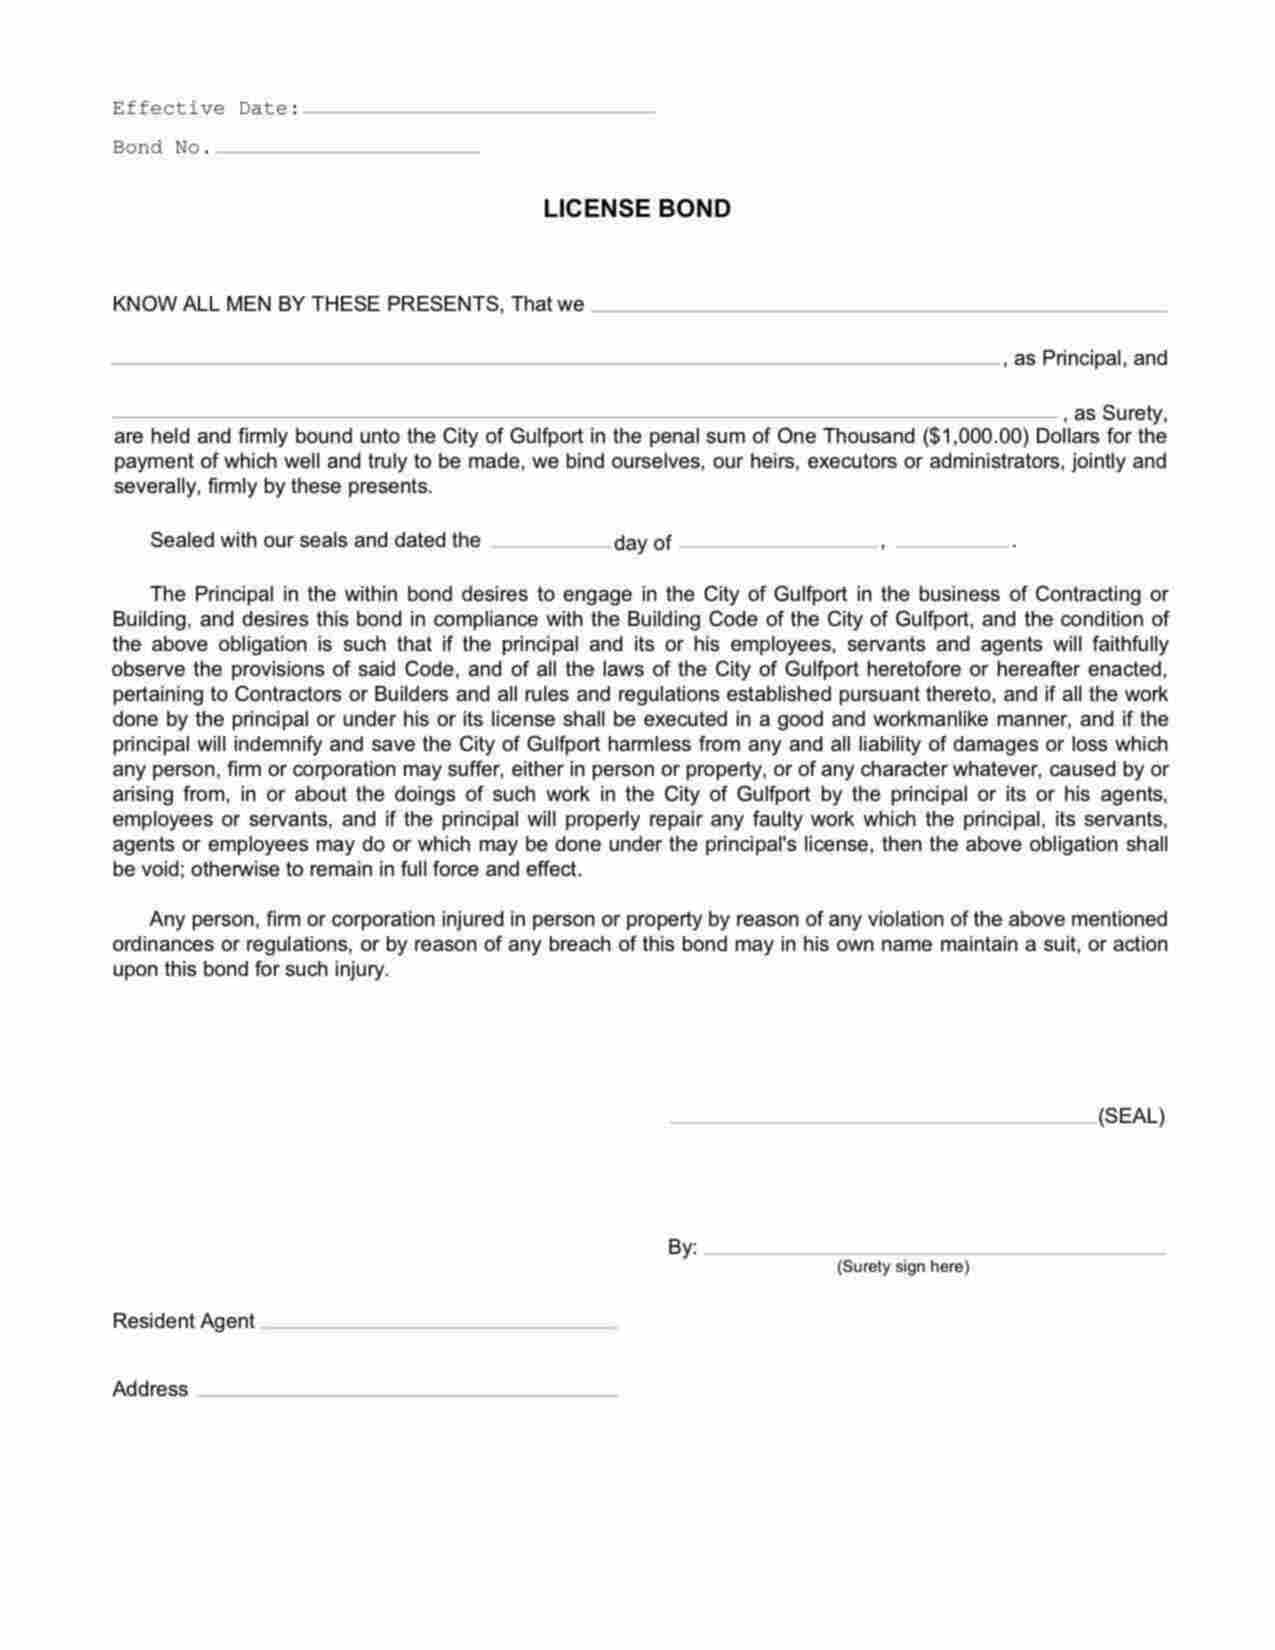 Mississippi Contracting or Building License Bond Form